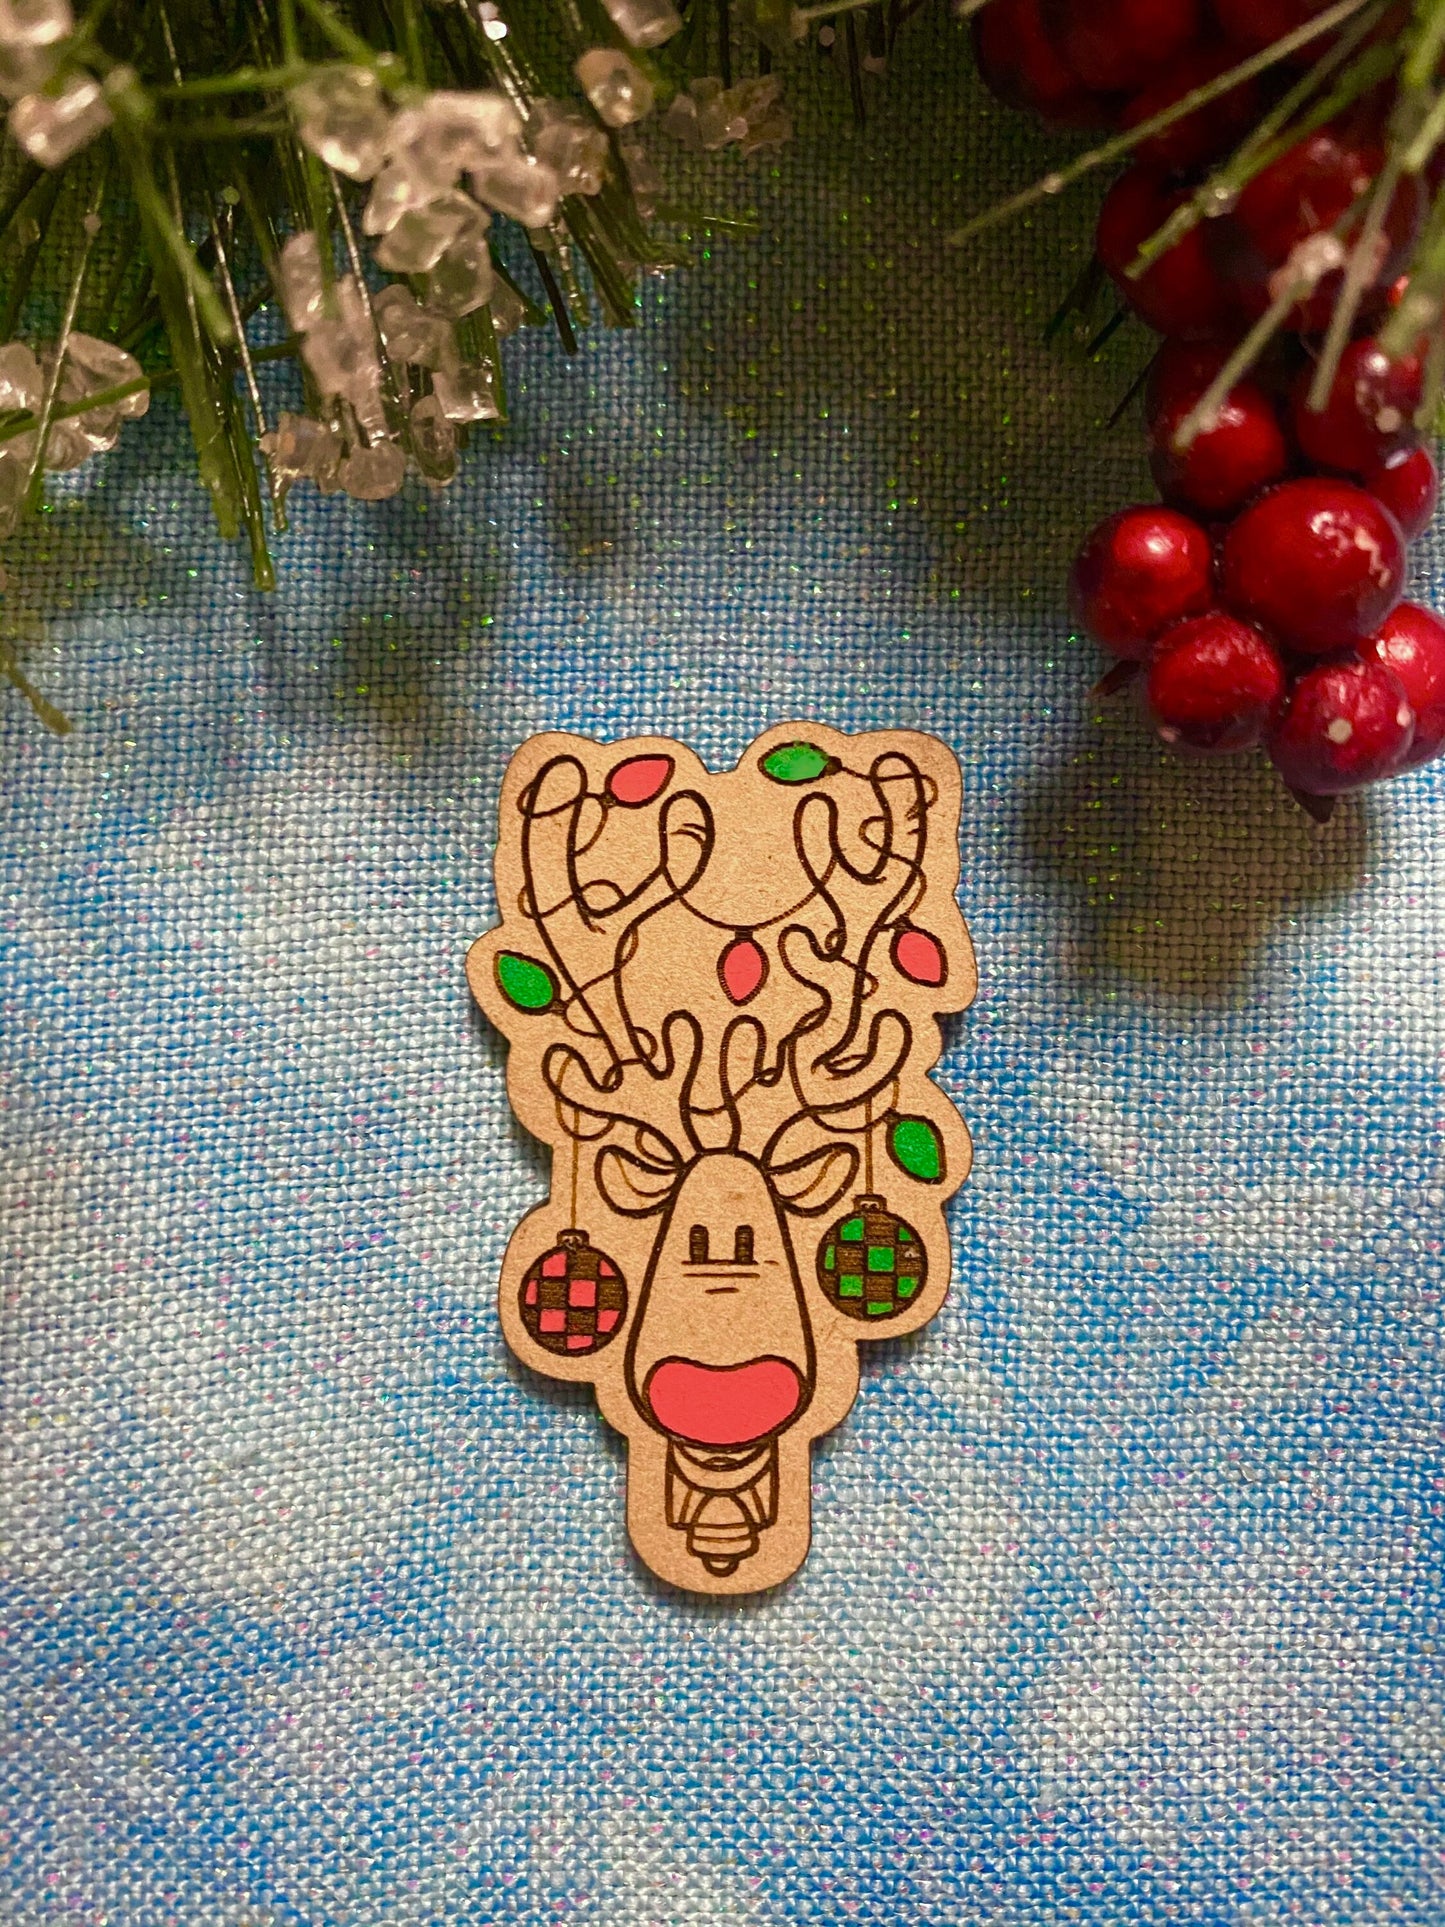 Rudolph the Red Nosed Reindeer needleminder